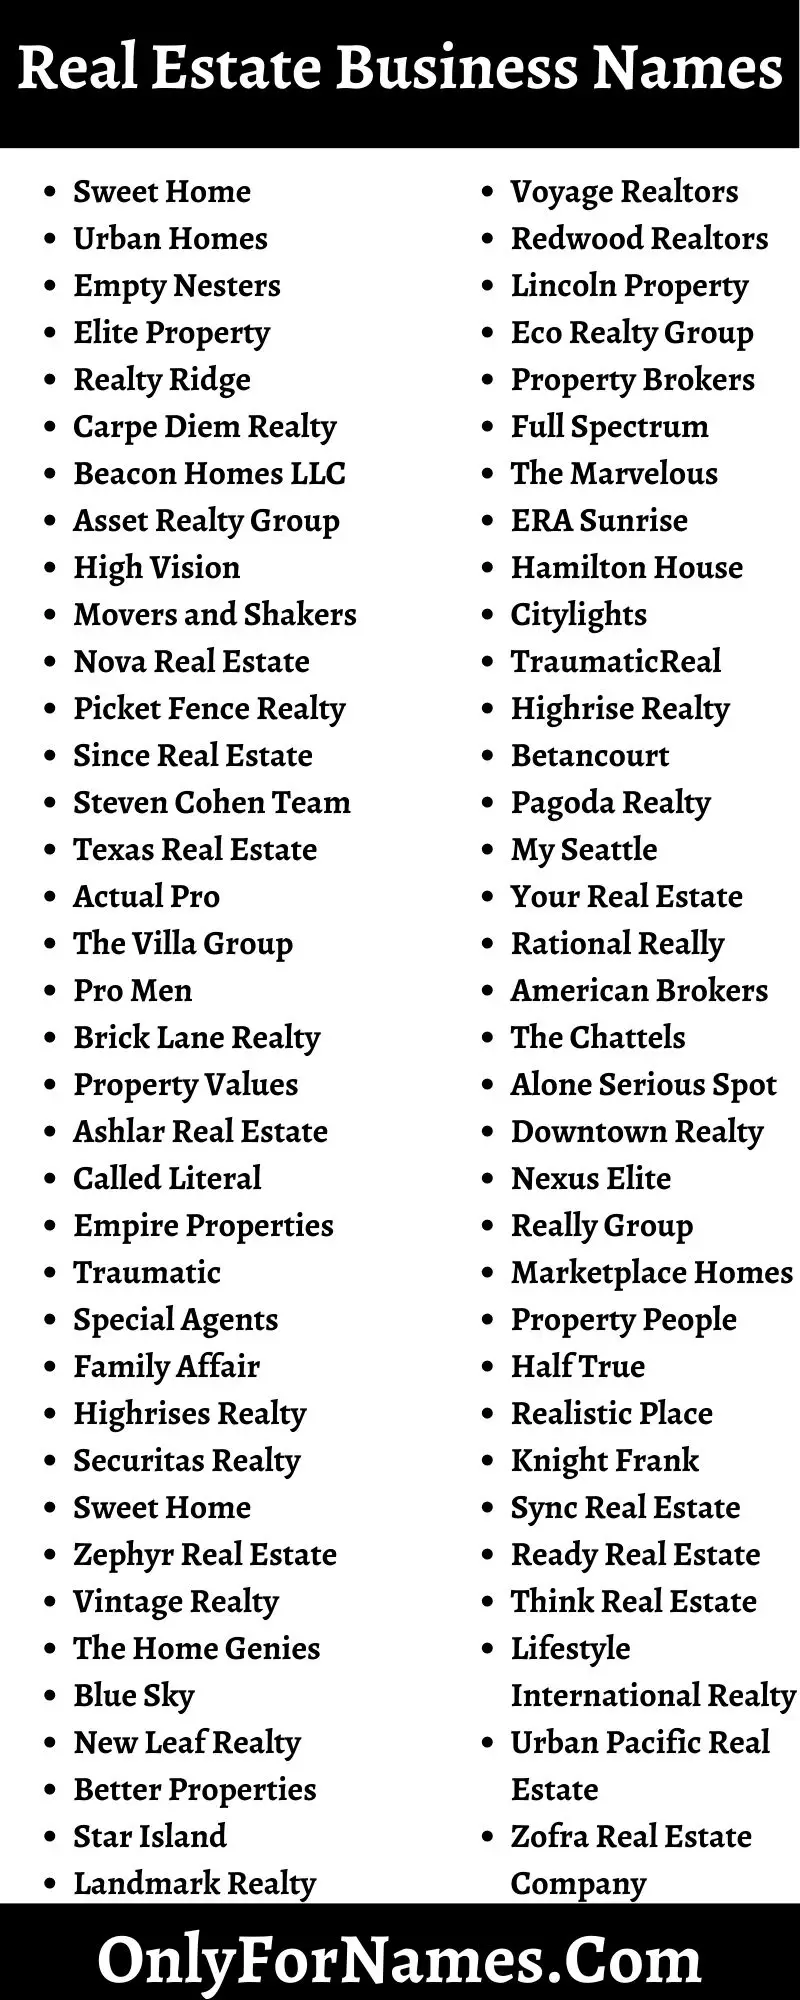 Real Estate Business Names